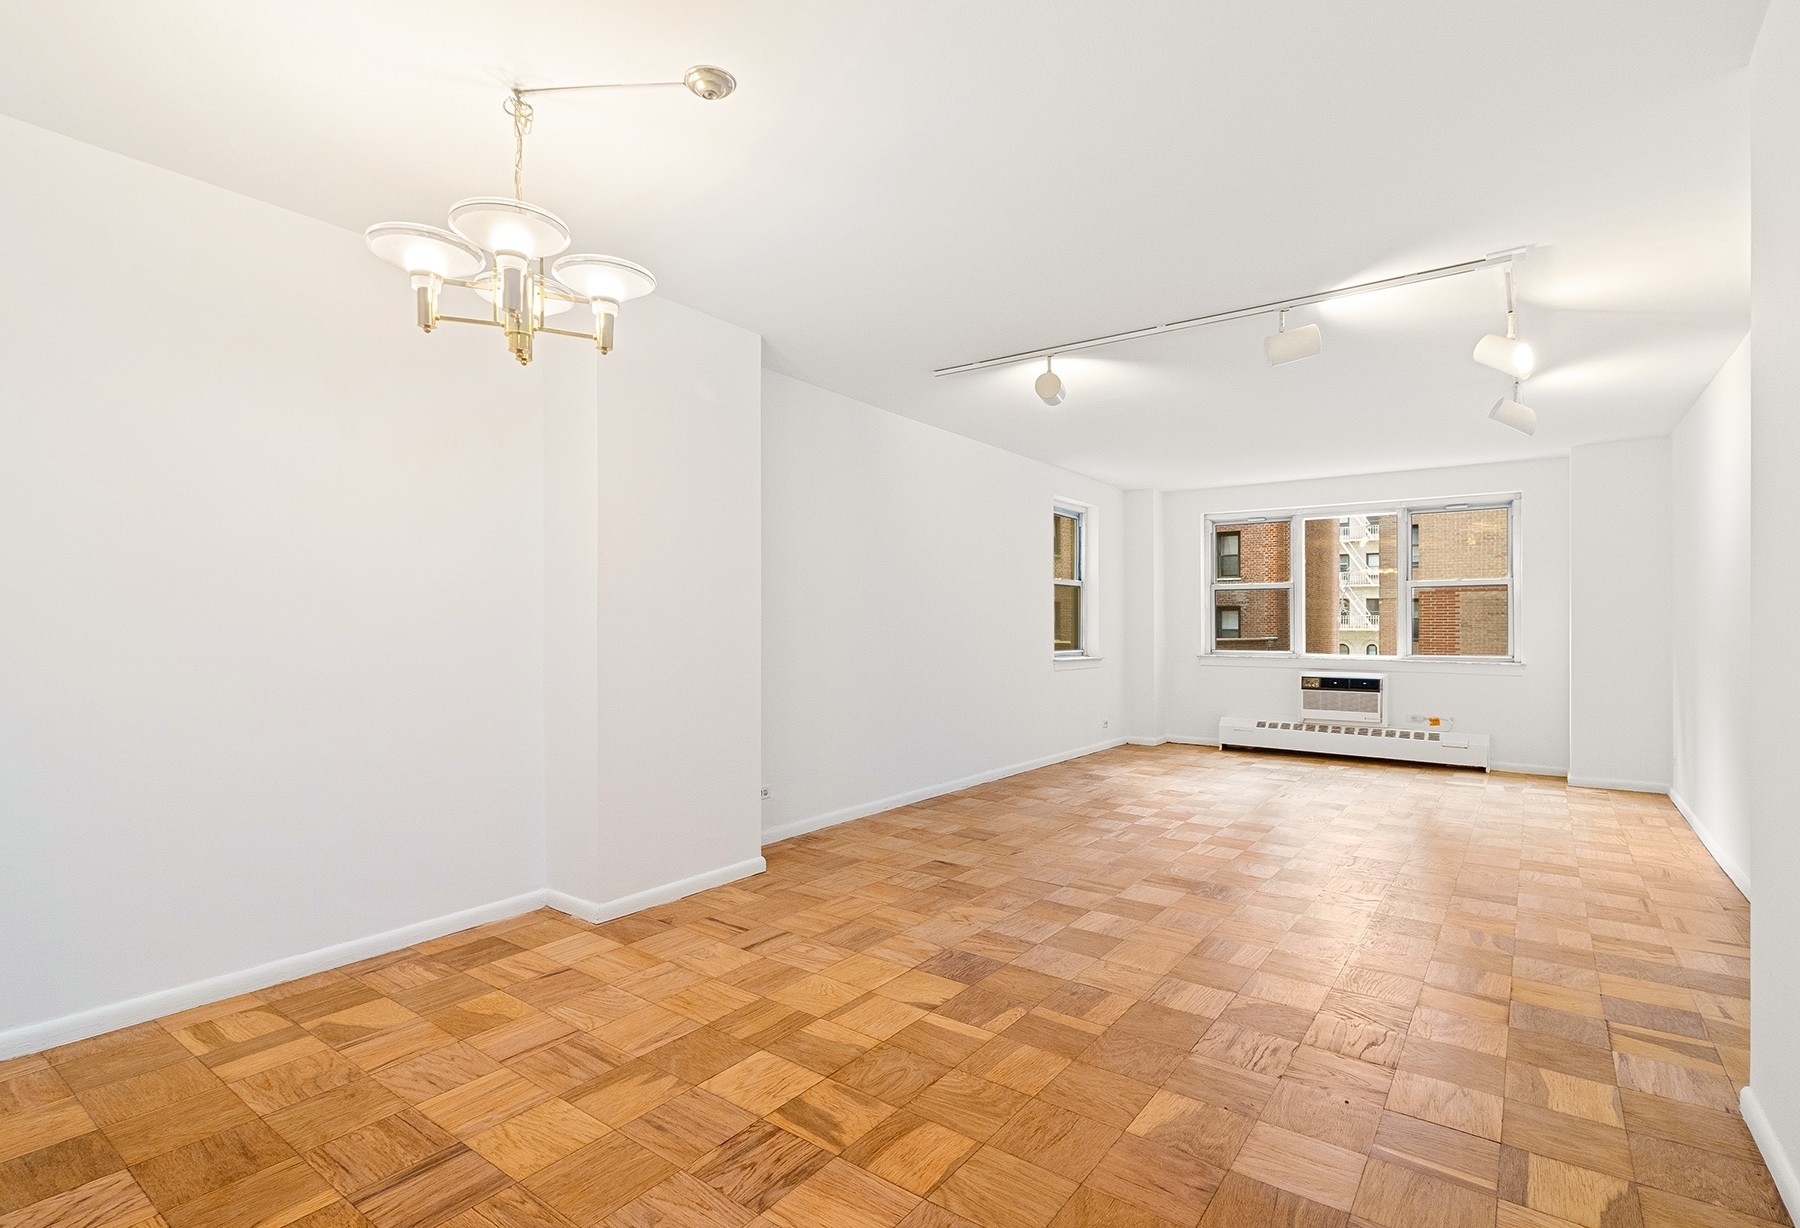 Co-op Properties for Sale at 333 E 79TH ST, 2S Yorkville, New York, New York 10075